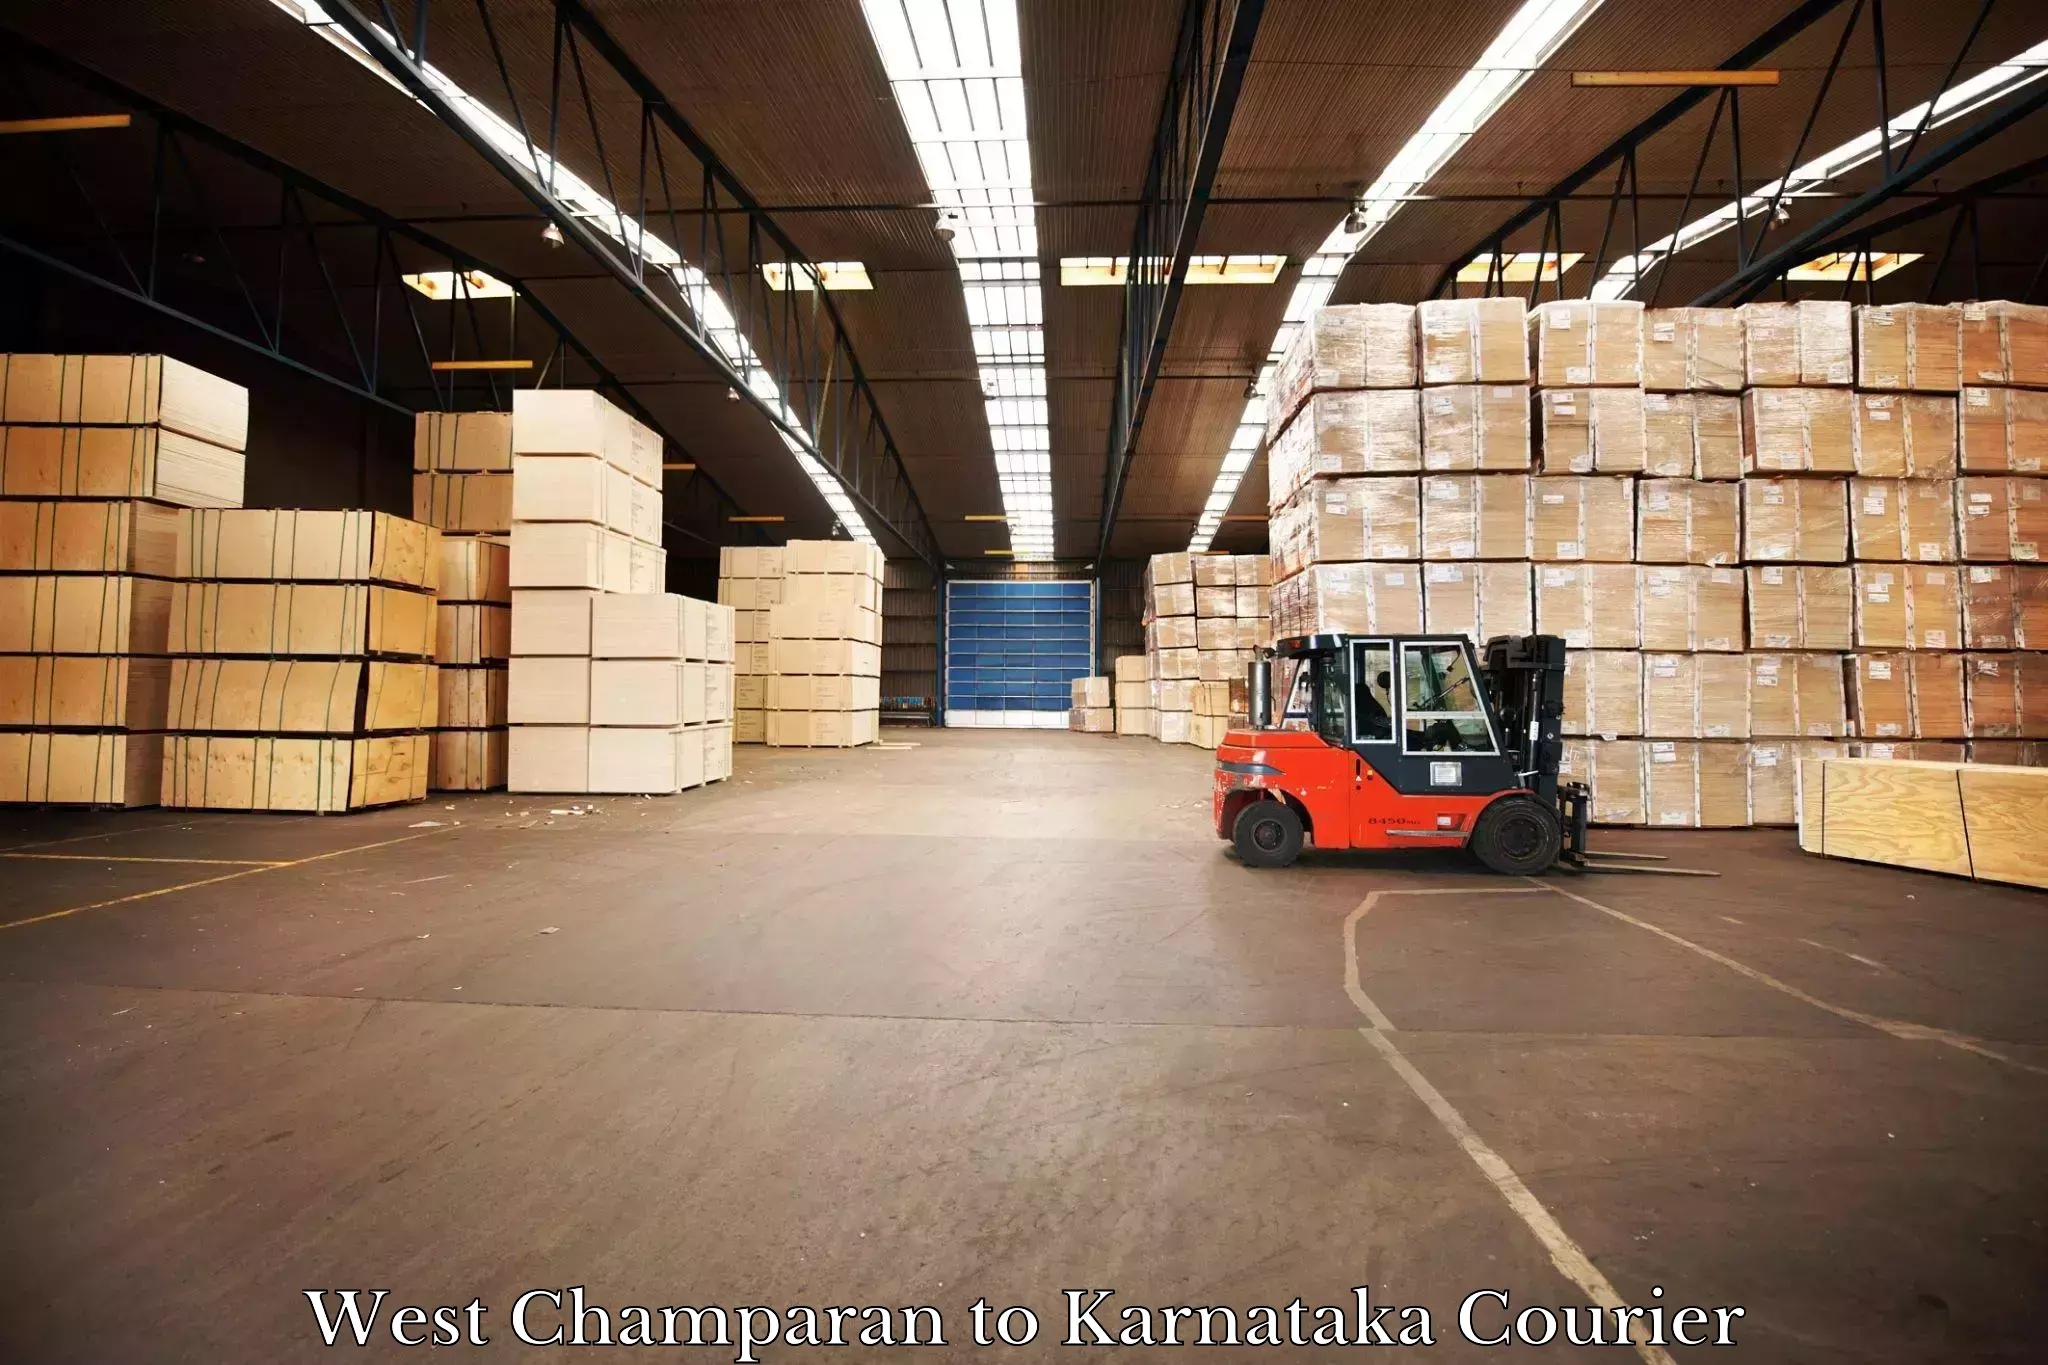 Courier service partnerships West Champaran to Thirthahalli